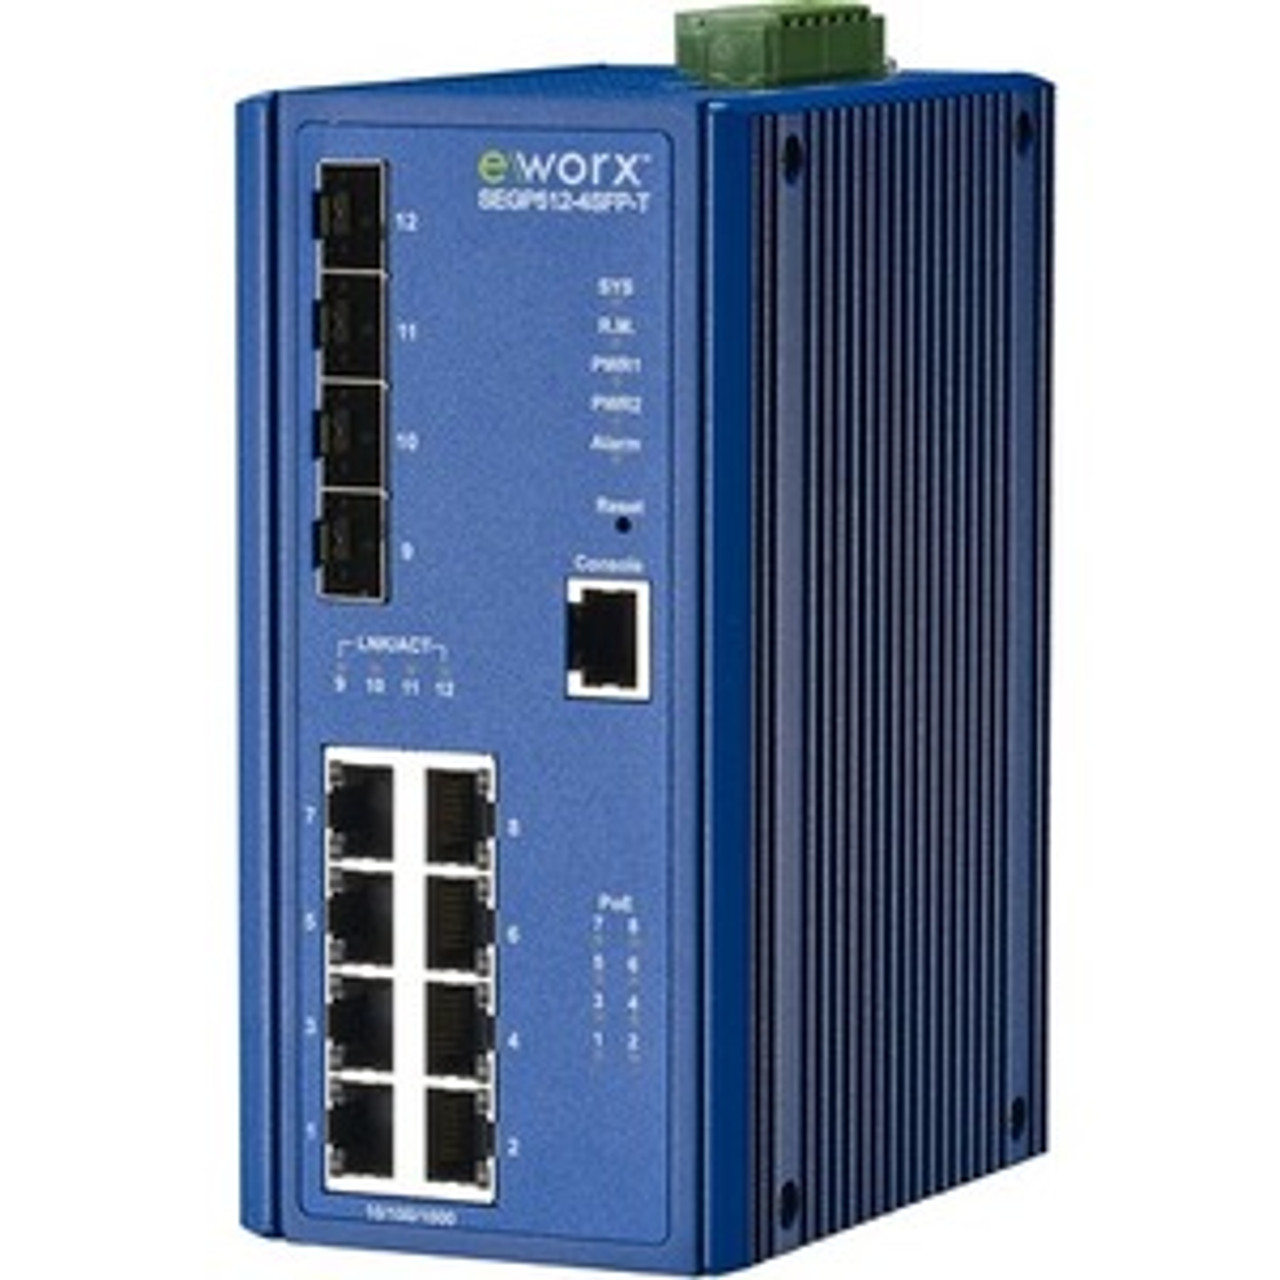 SEGP512-4SFP-T B+B SmartWorx eWorx SEGP512-4SFP-T Ethernet Switch - 8 Ports - Manageable - 10/100/1000Base-TX - 2 Layer Supported - Modular - 4 SFP Slots - Twisted